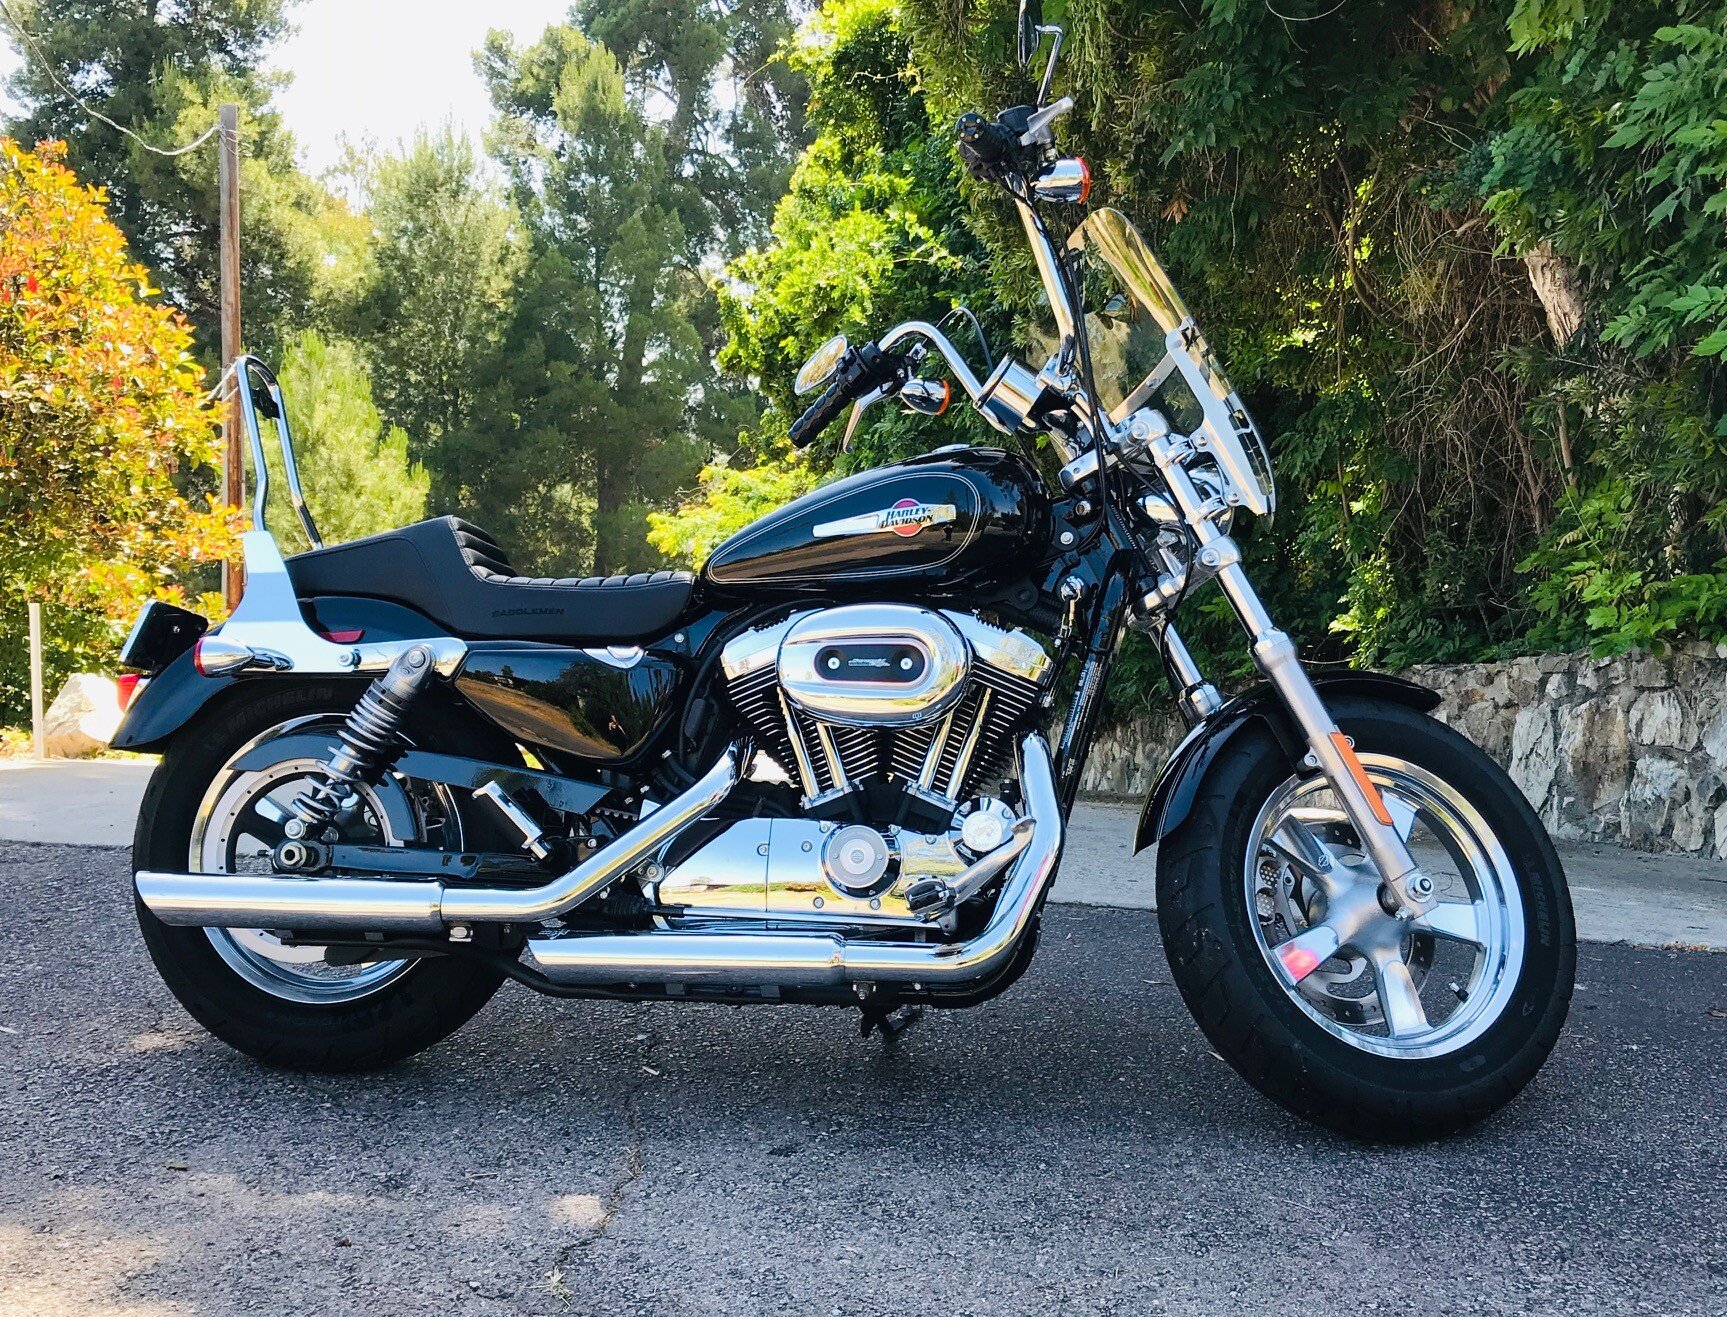 sportster 1200 for sale